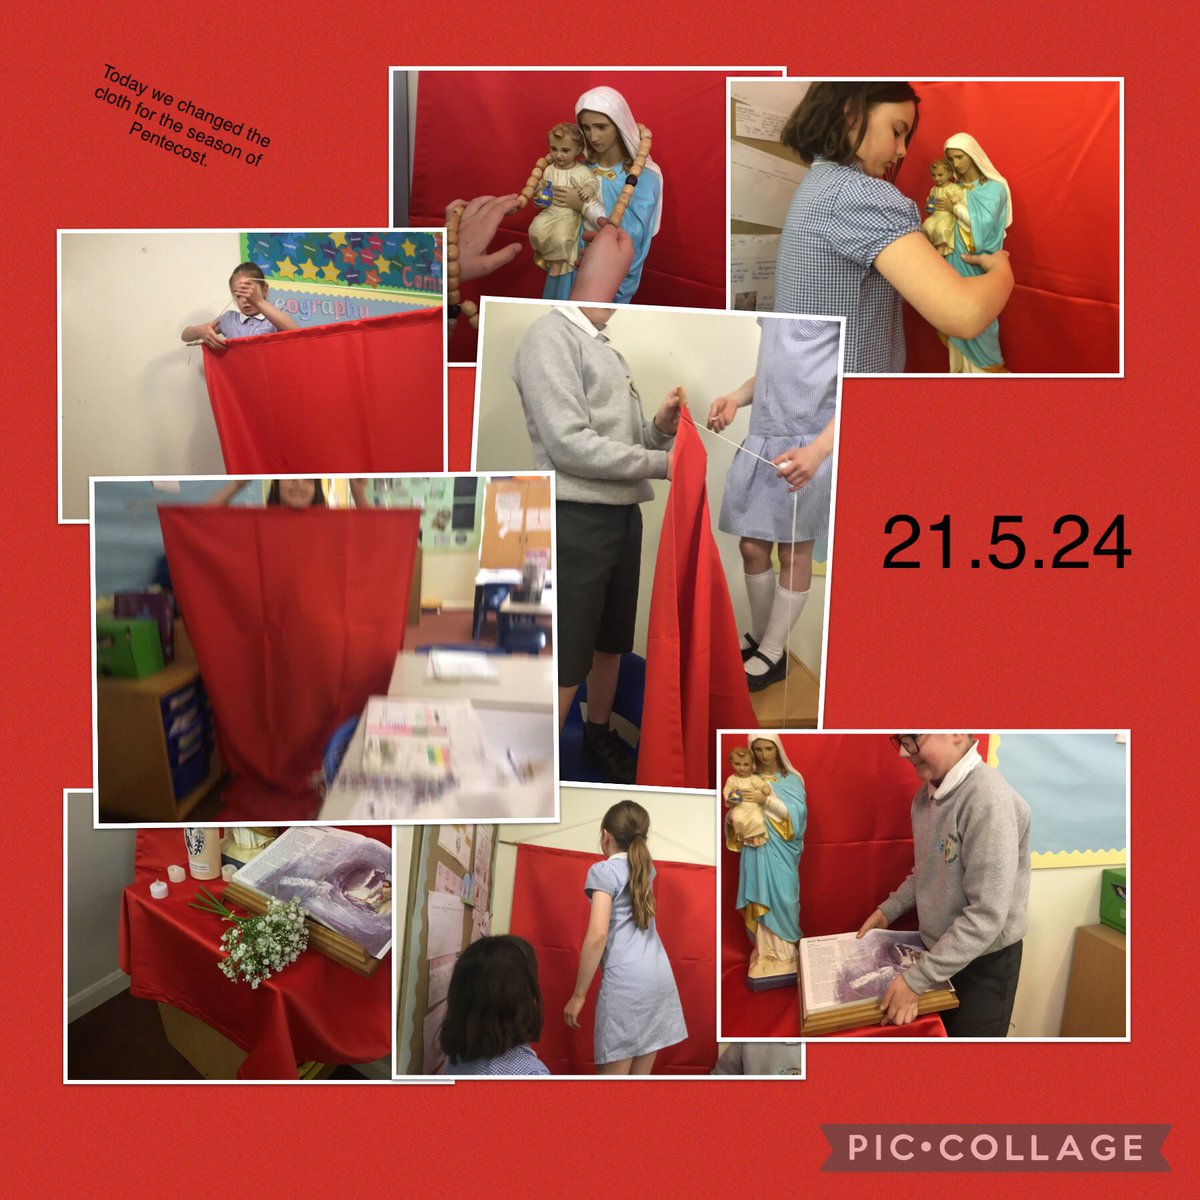 We changed our cloth to show the season of Pentecost. We are looking forward to leading mass on Friday too. We are thinking about friends in Year 6 tonight.